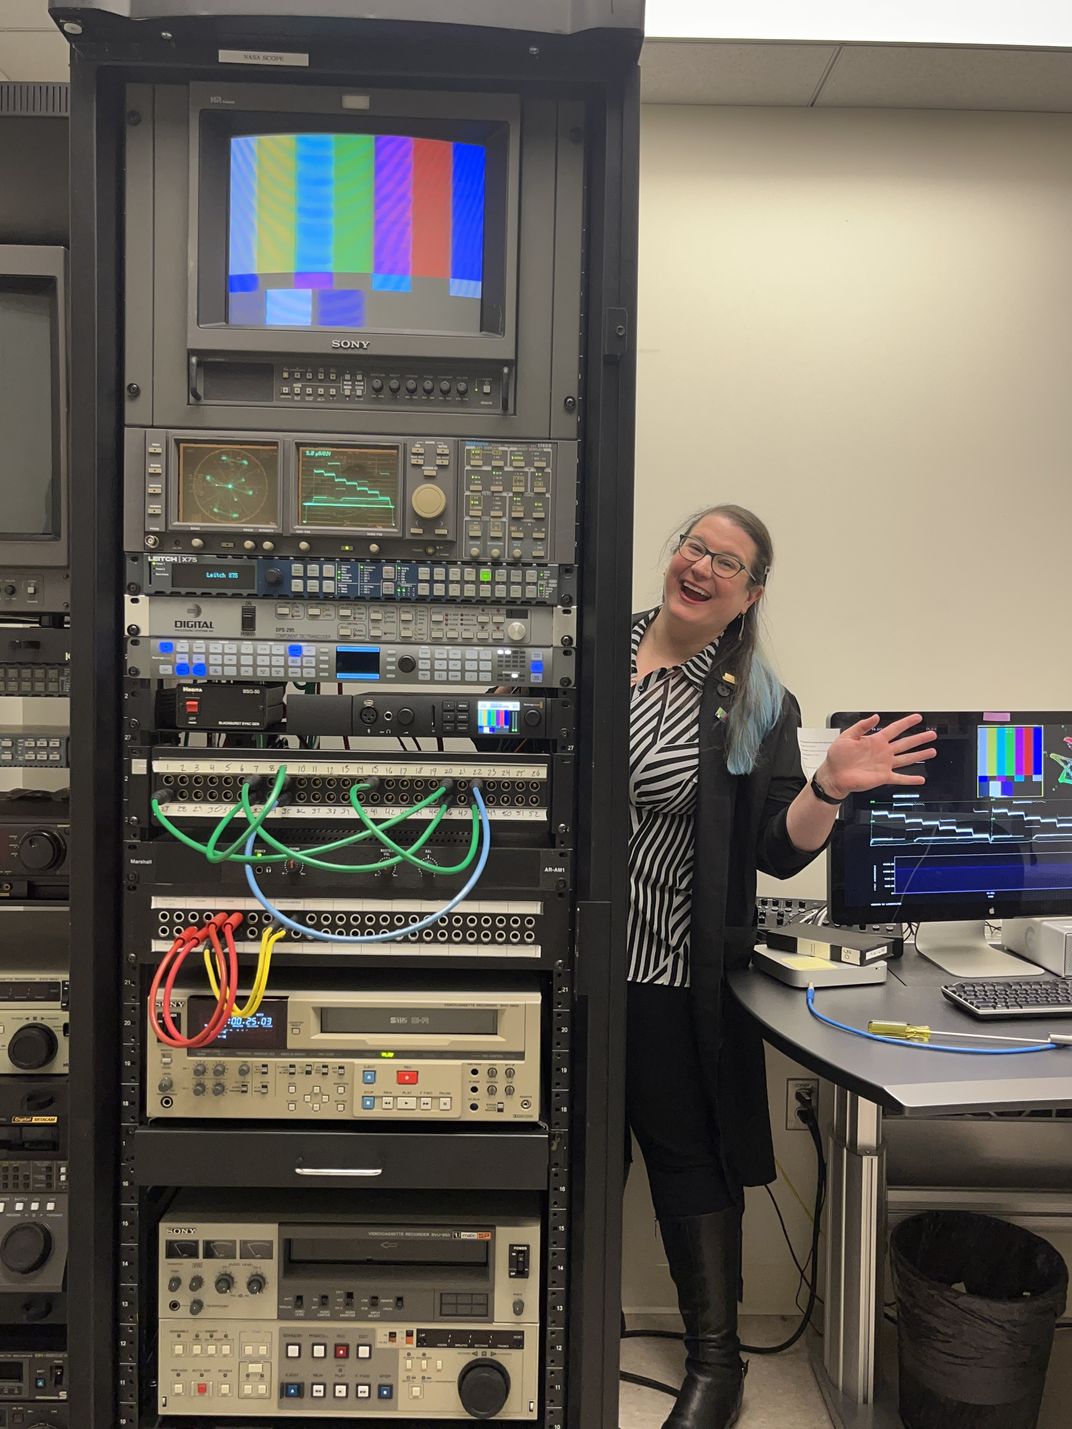 NMAAHC Video Archives Technician, Emily Nabasny smiles and waves to the camera from behind a towering rack of analog video equipment including a TV monitor displaying color bars.